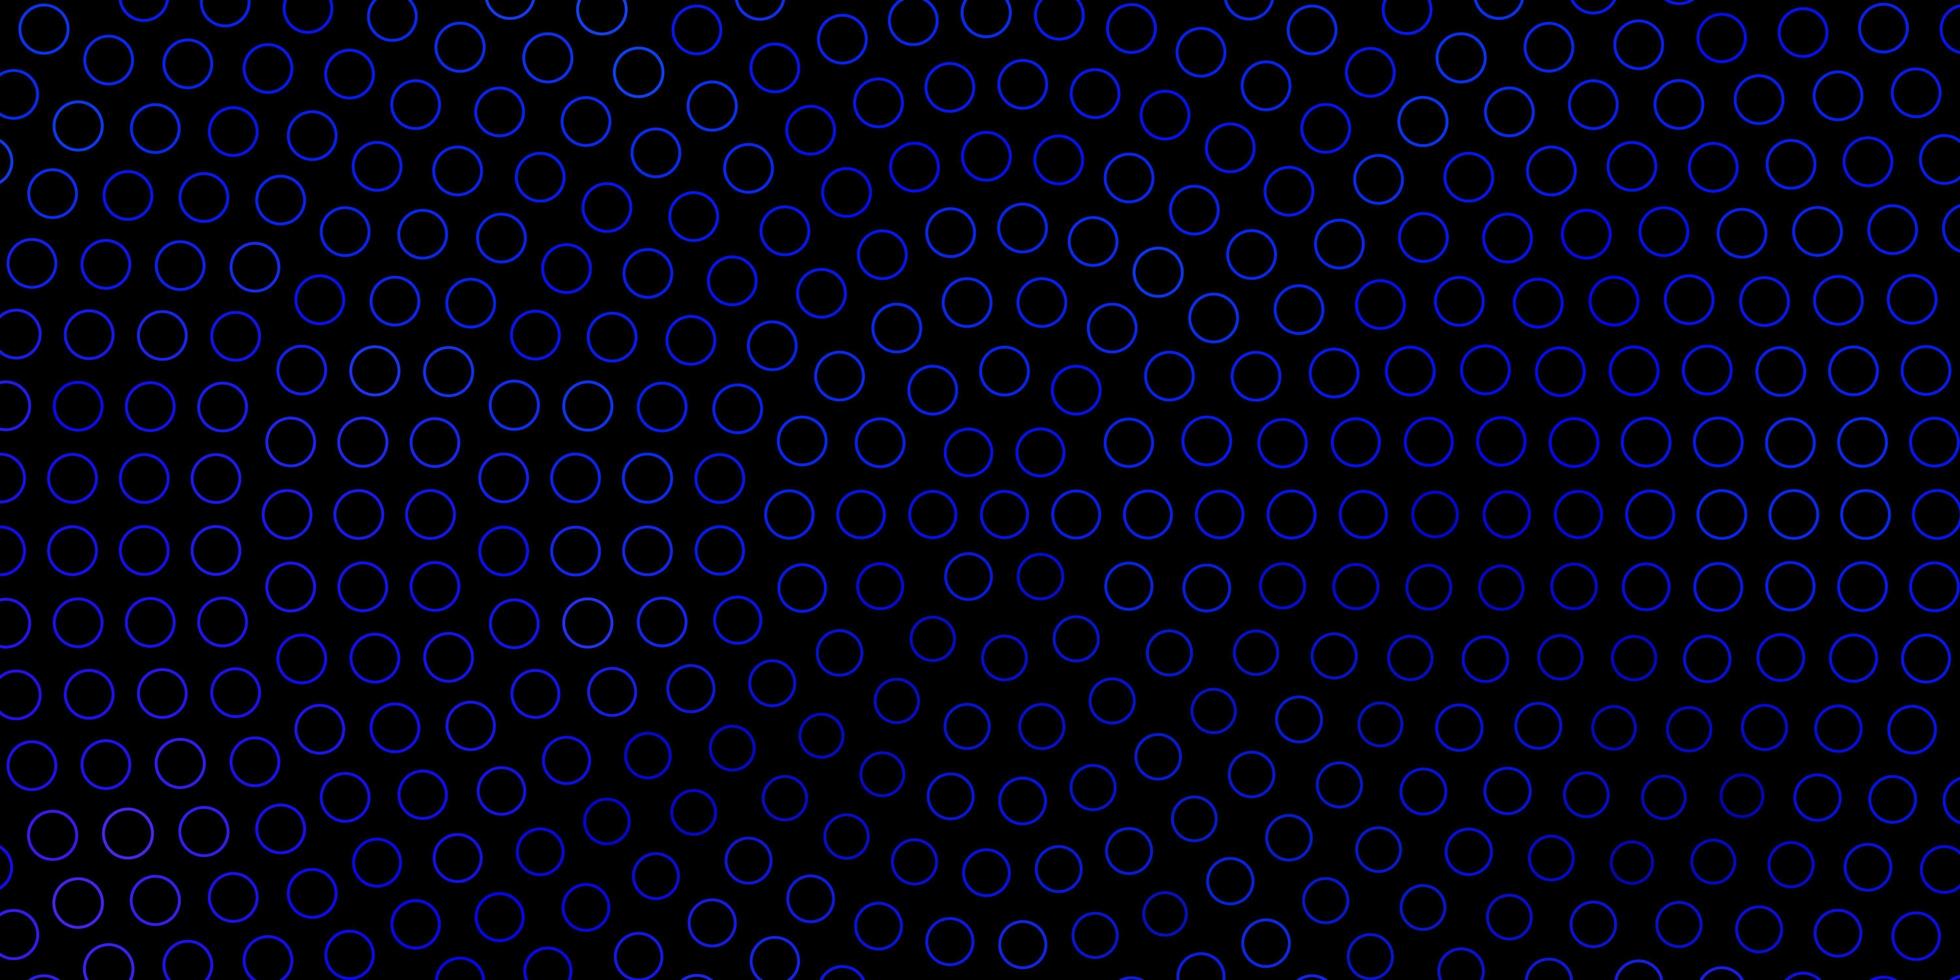 Dark BLUE vector backdrop with circles Colorful illustration with gradient dots in nature style Pattern for websites landing pages